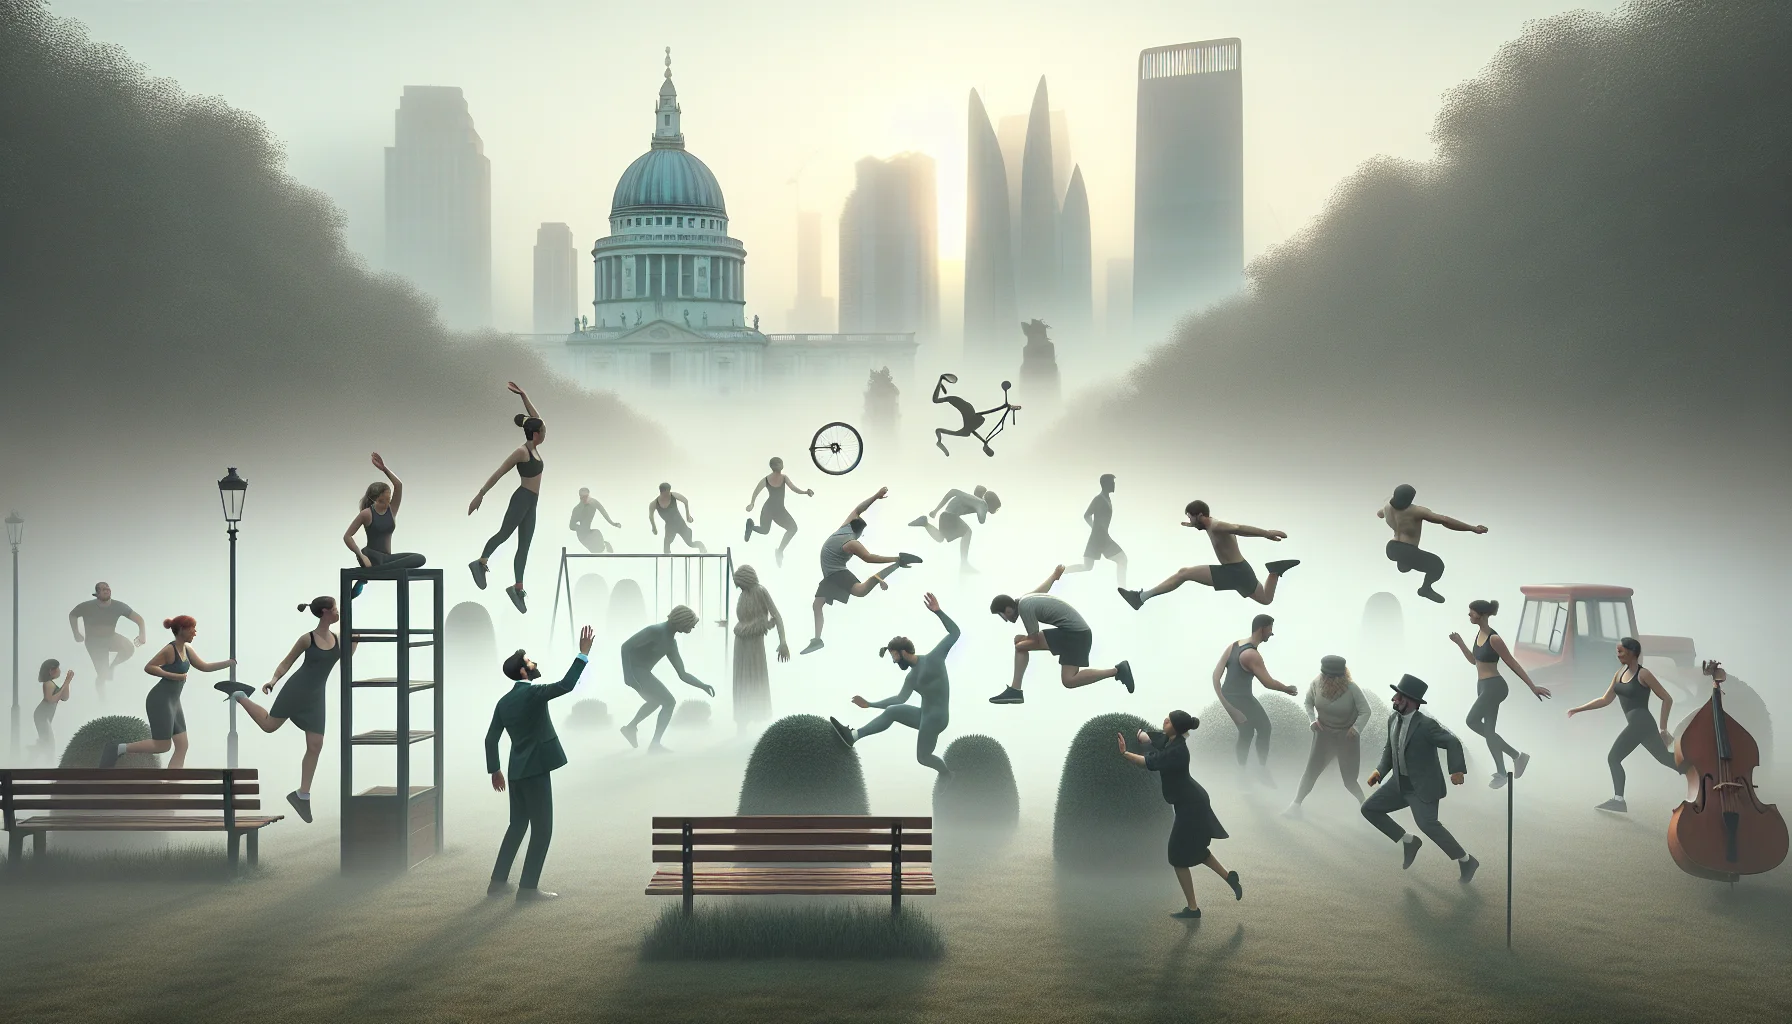 An entertaining and whimsical scenario of fog parkour, crafted with striking realism. Imagine a fog-soaked cityscape at dawn, where silhouettes of structures are barely visible. Within this misty setting, a motley group of individuals of varying descents - including Caucasian, Hispanic, Black, Middle-Eastern, and South Asian individuals both male and female - showcasing their parkour skills with hilarious exaggerated postures. Perhaps a woman is seen attempting to vault over a park bench while missing her footing and falling into a fluffy bush, while a man performs a somersault, but lands in an awkward and funny stance. The scene is presented in a light-hearted manner to promote exercise in an amusing and inviting way.